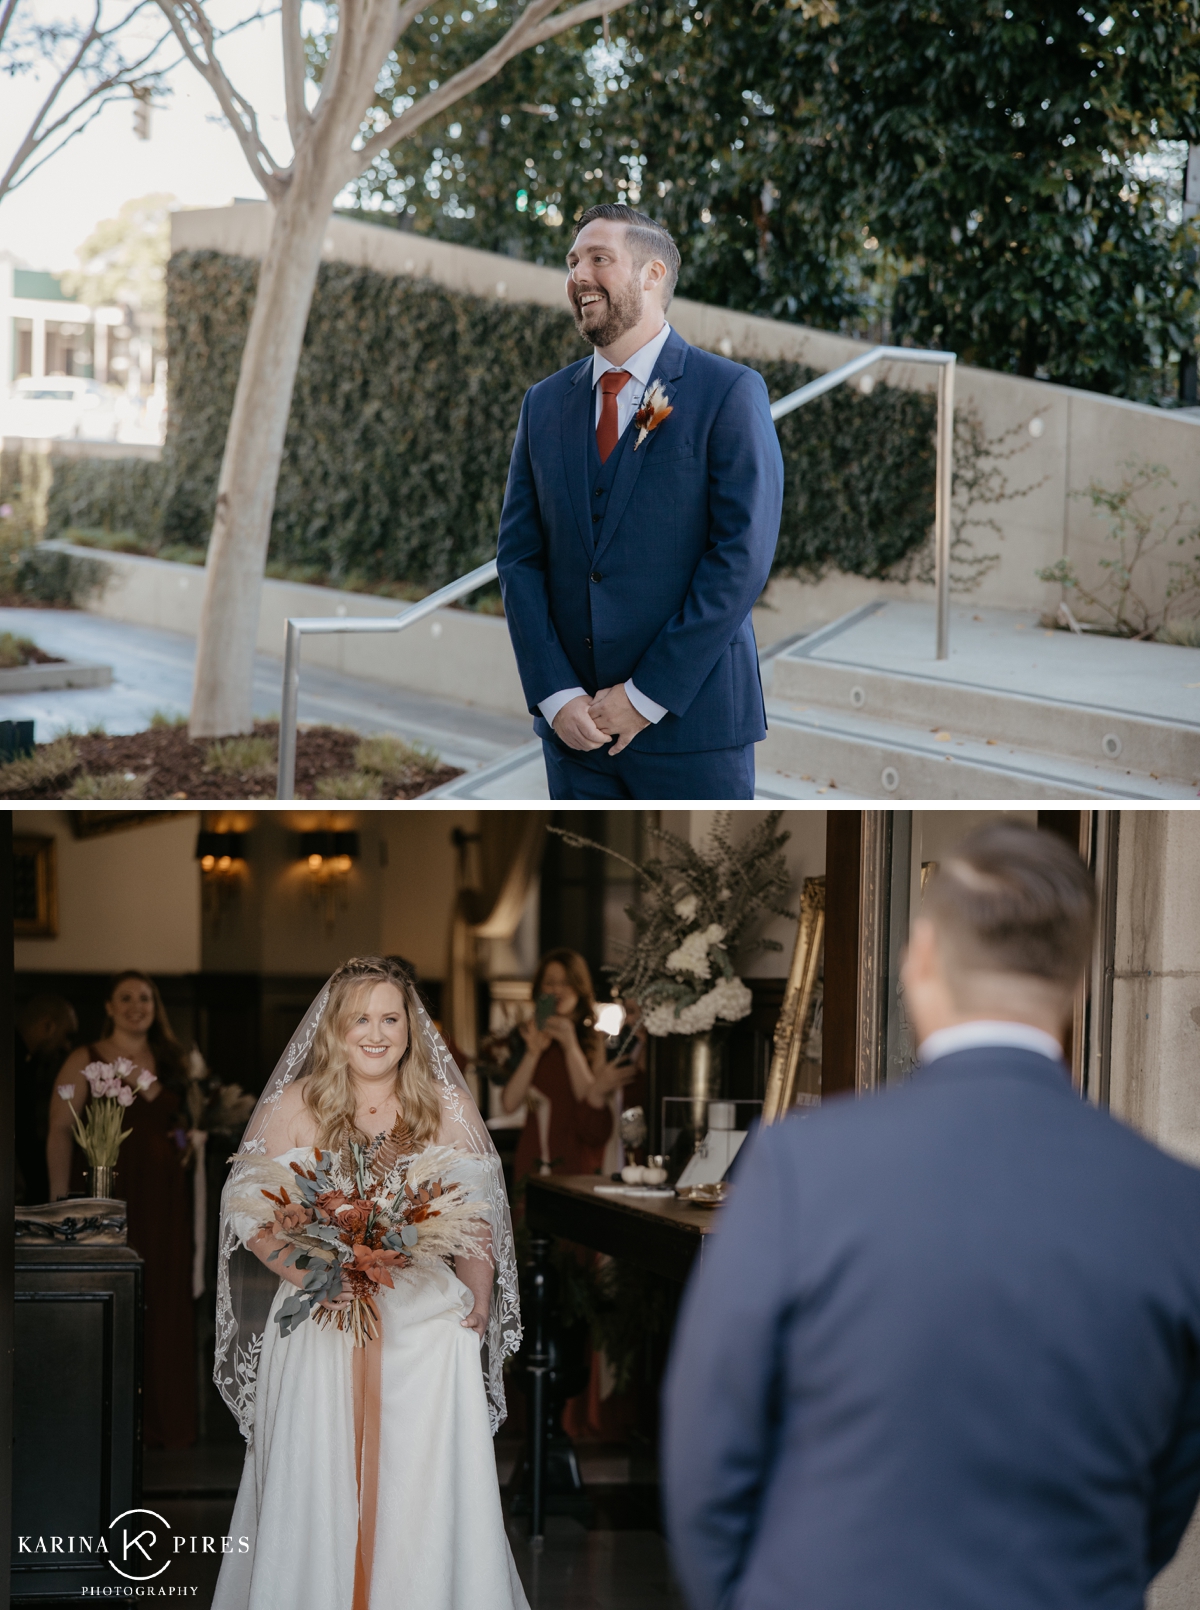 Wedding first look at The Culver Hotel